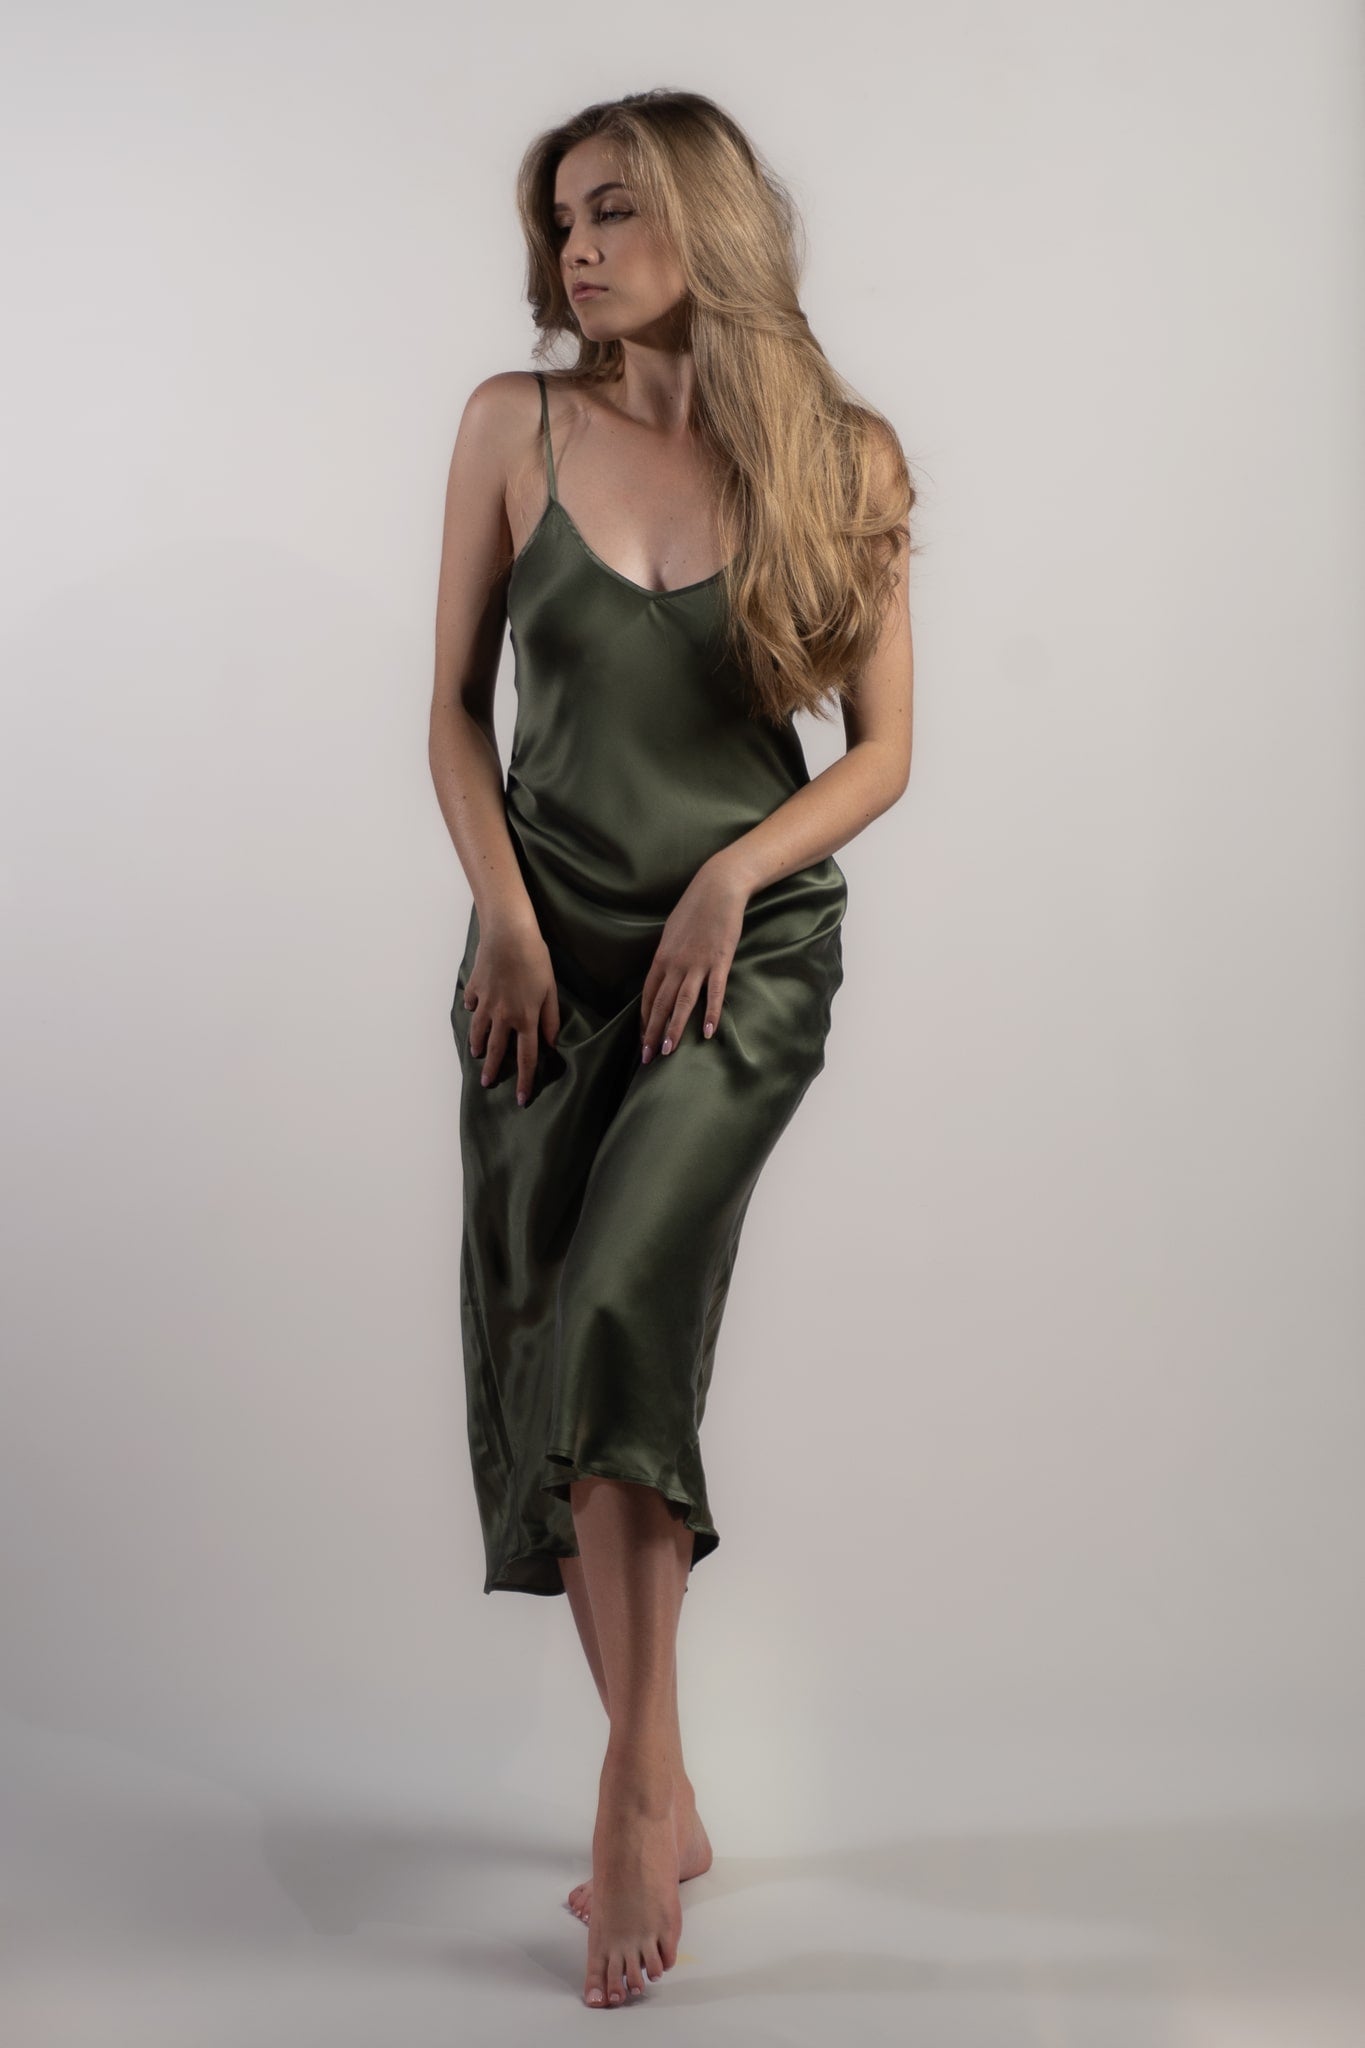 Woman wearing Silk Closet silk slip dress in olive green. 100% pure sandwashed silk with bias cut and adjustable spaghetti straps.